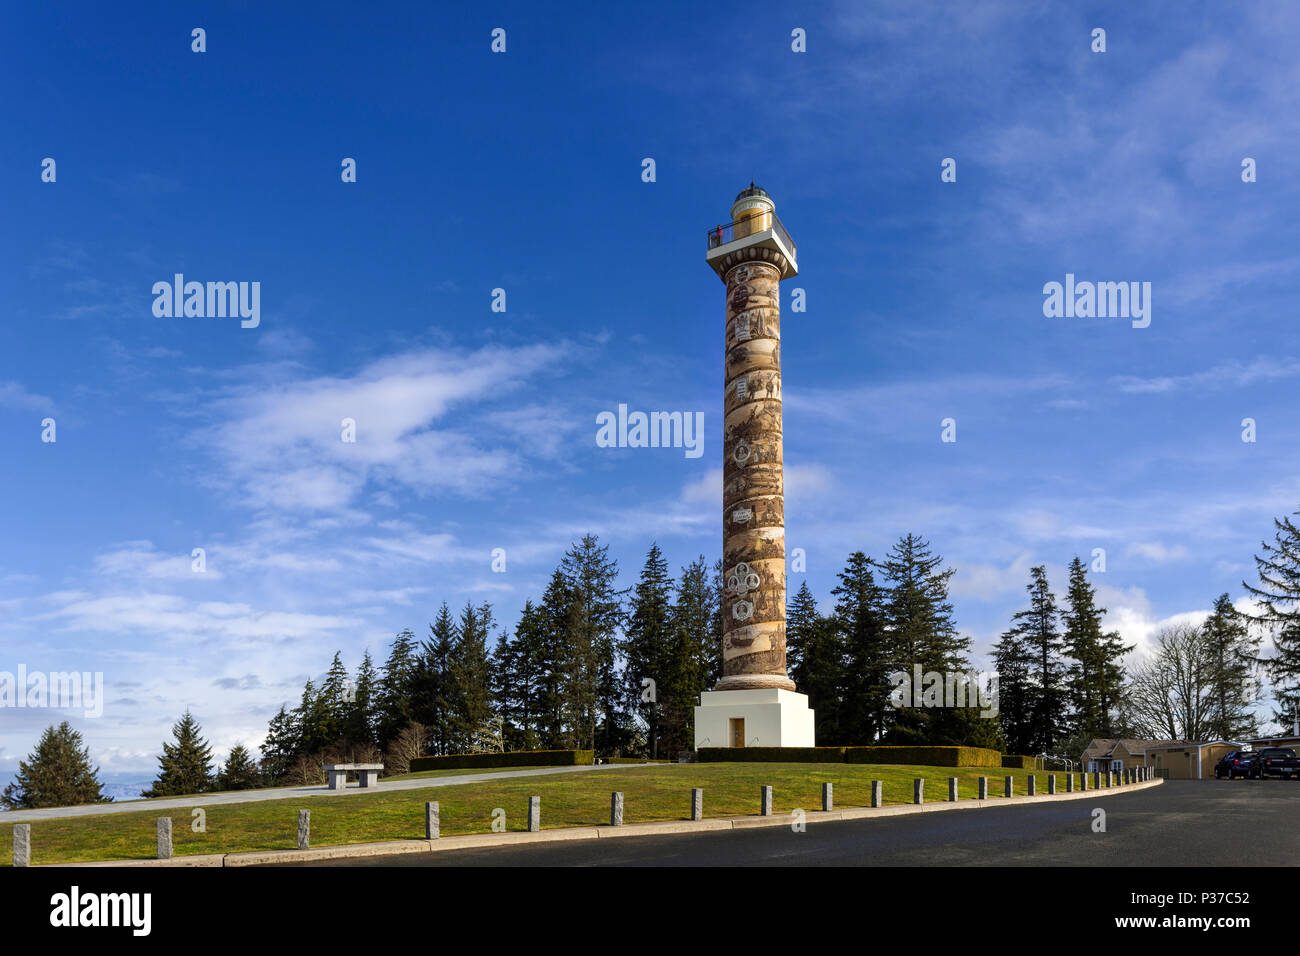 OR02469-00...OREGON - The 125 foot tall Astoria Column stands high above the town of Astoria on Coxcomb Hill. the spiral painting shows 14 significant Stock Photo